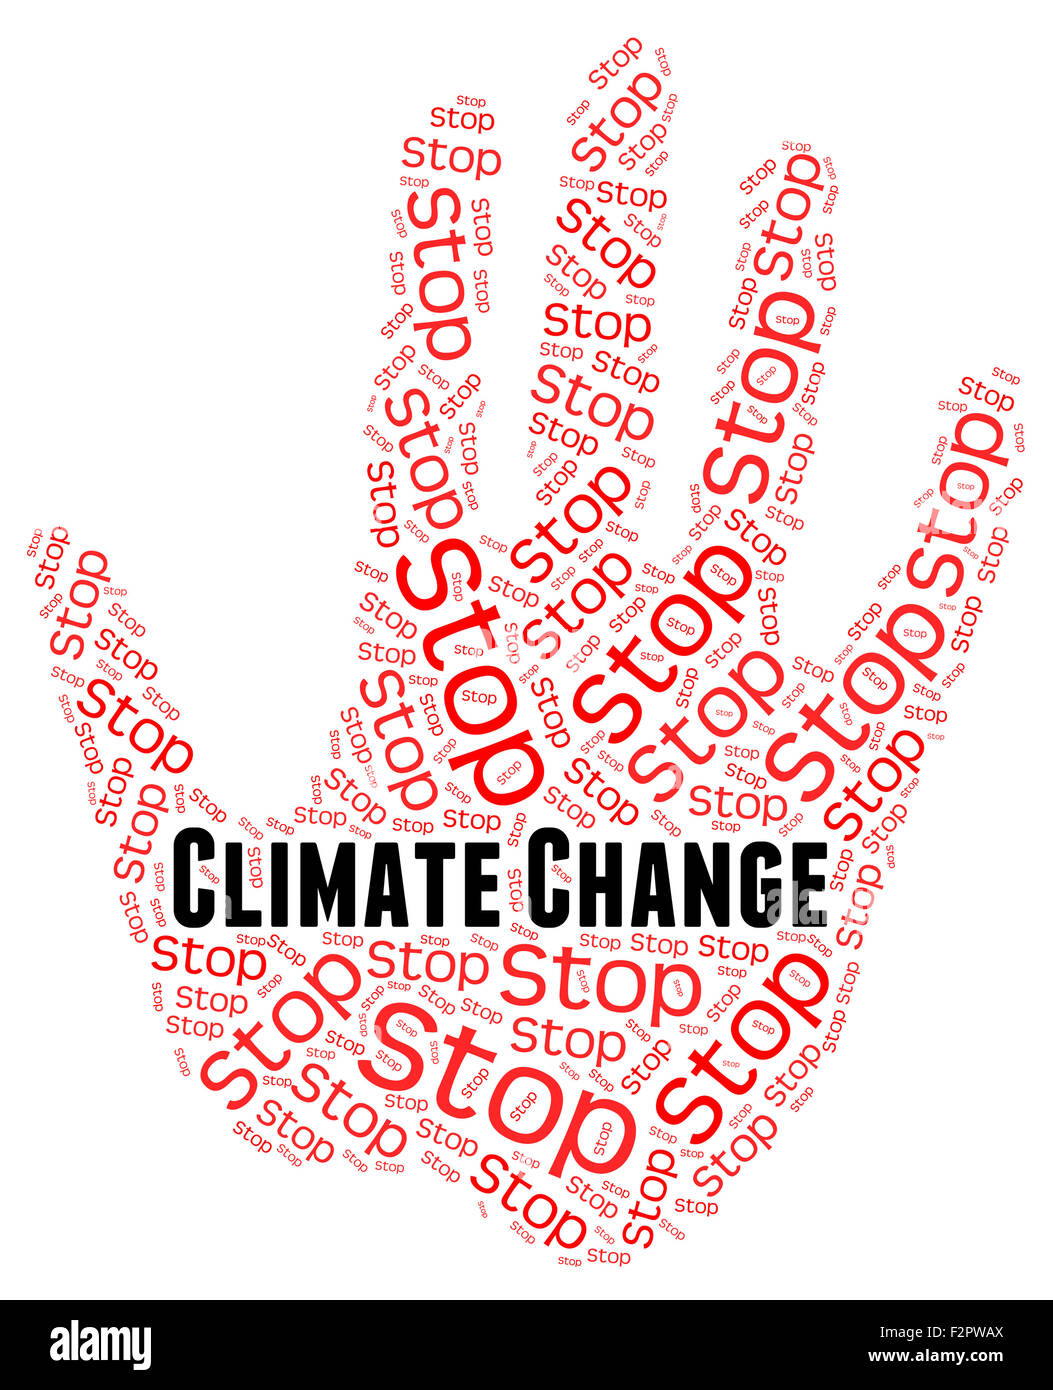 Stop Climate Change Meaning Global Warming And Rethink Stock Photo